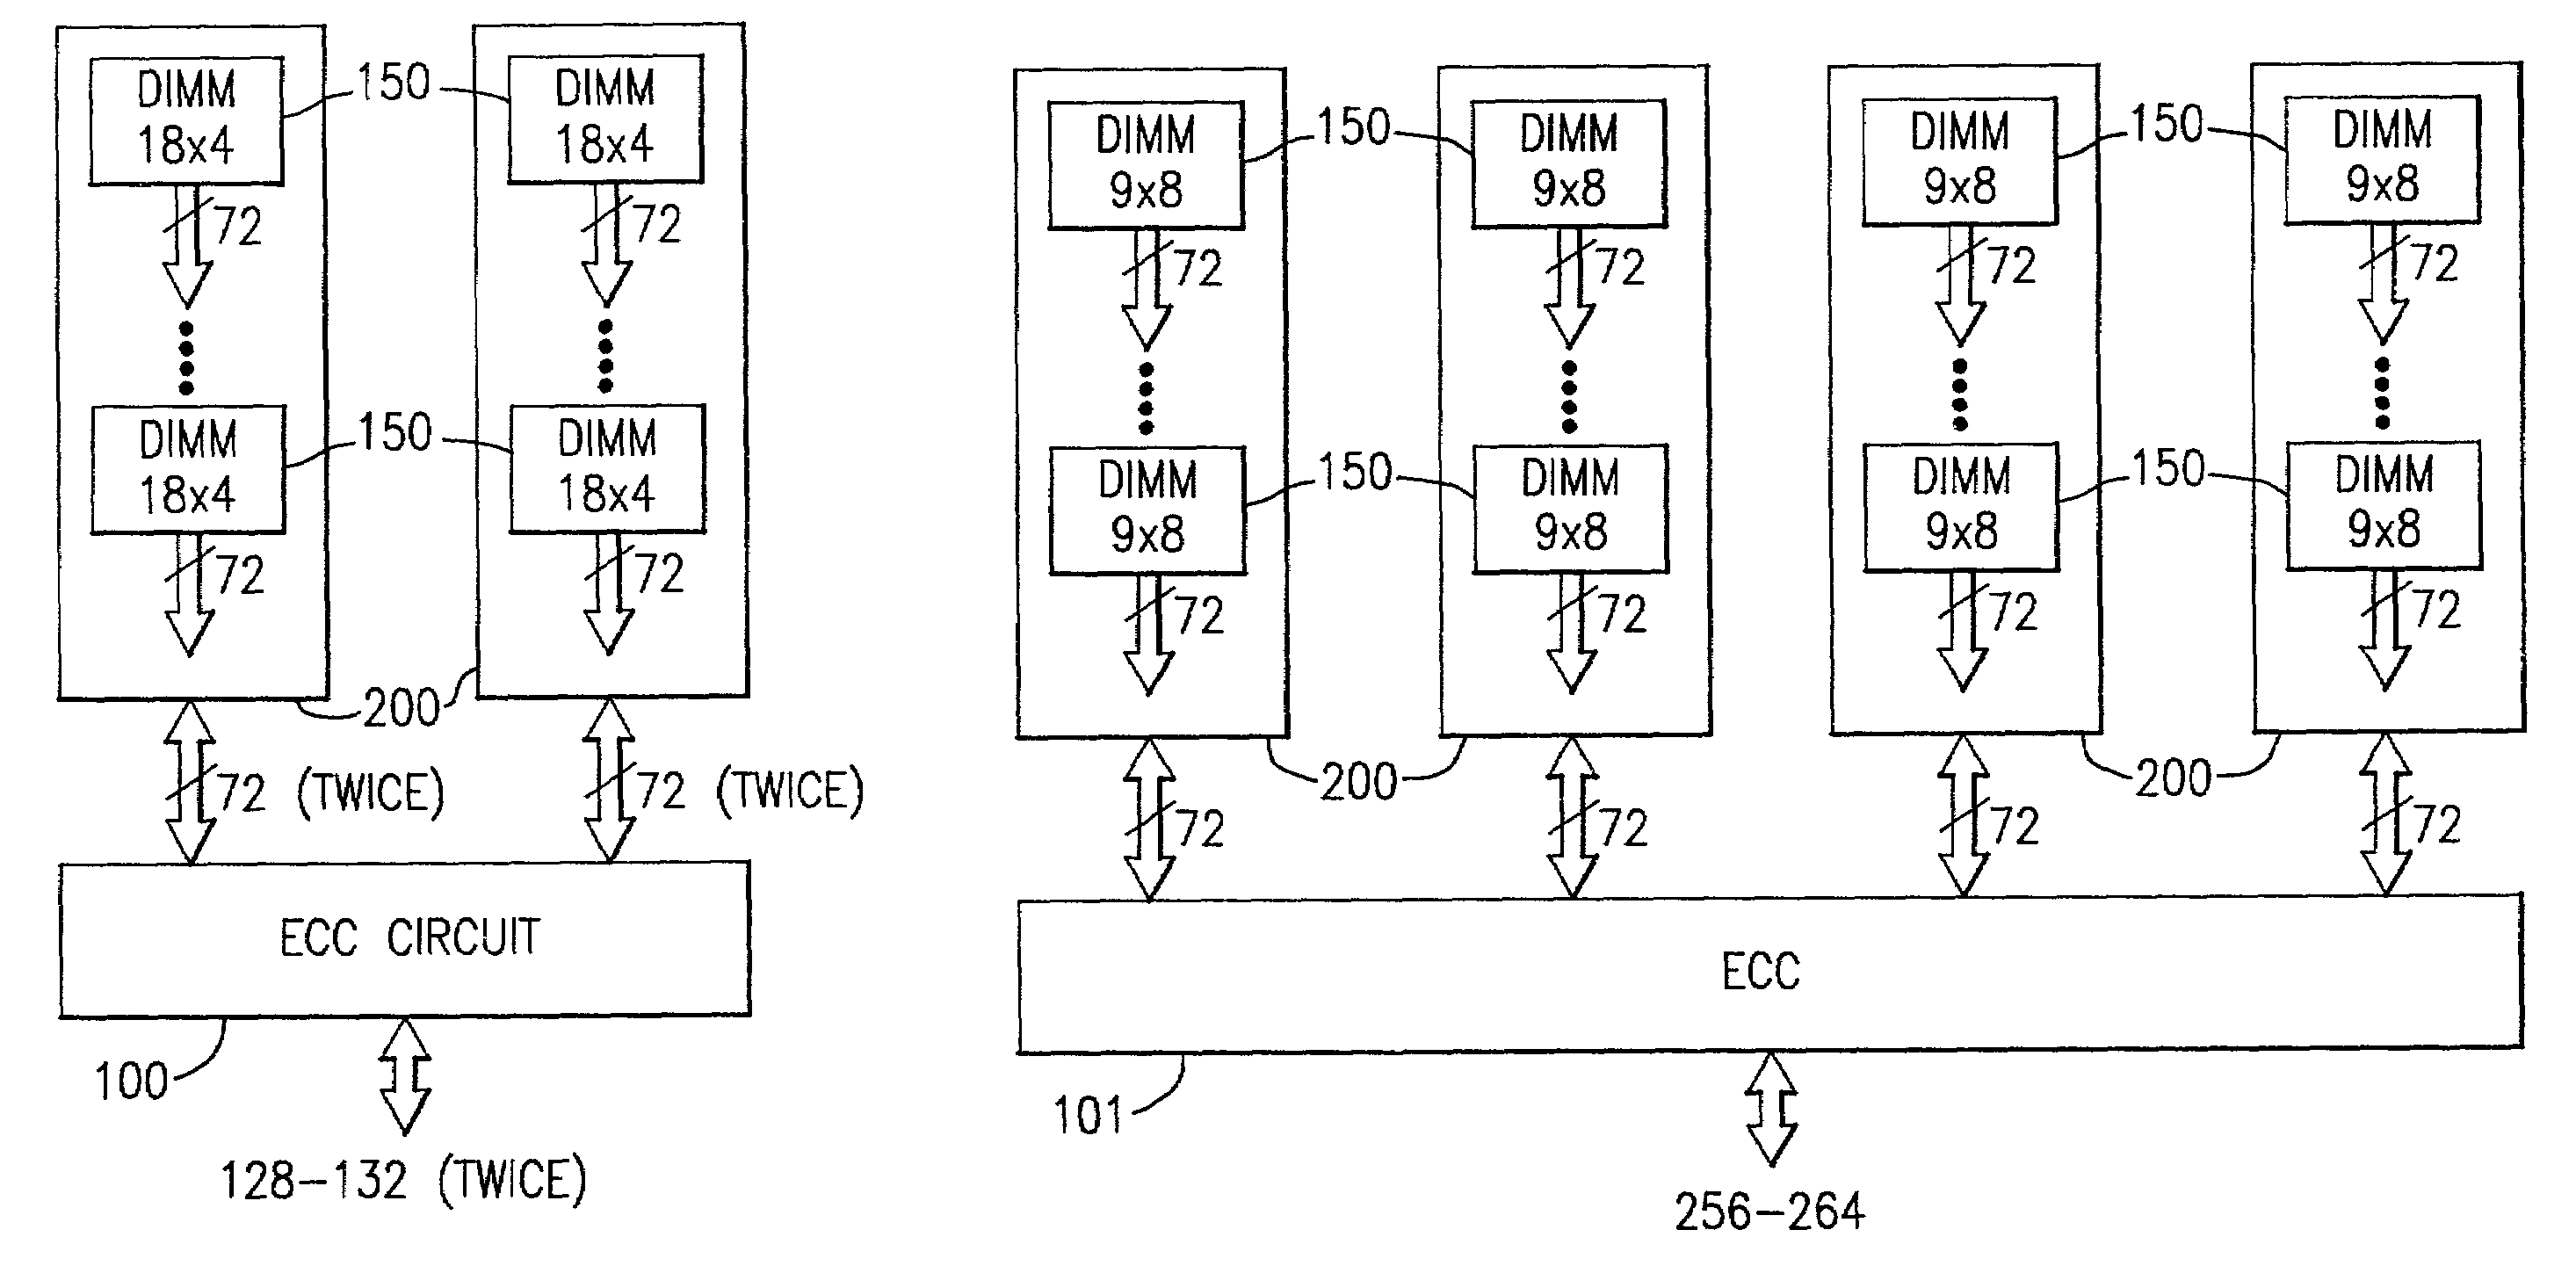 Multi-cycle symbol level error correction and memory system